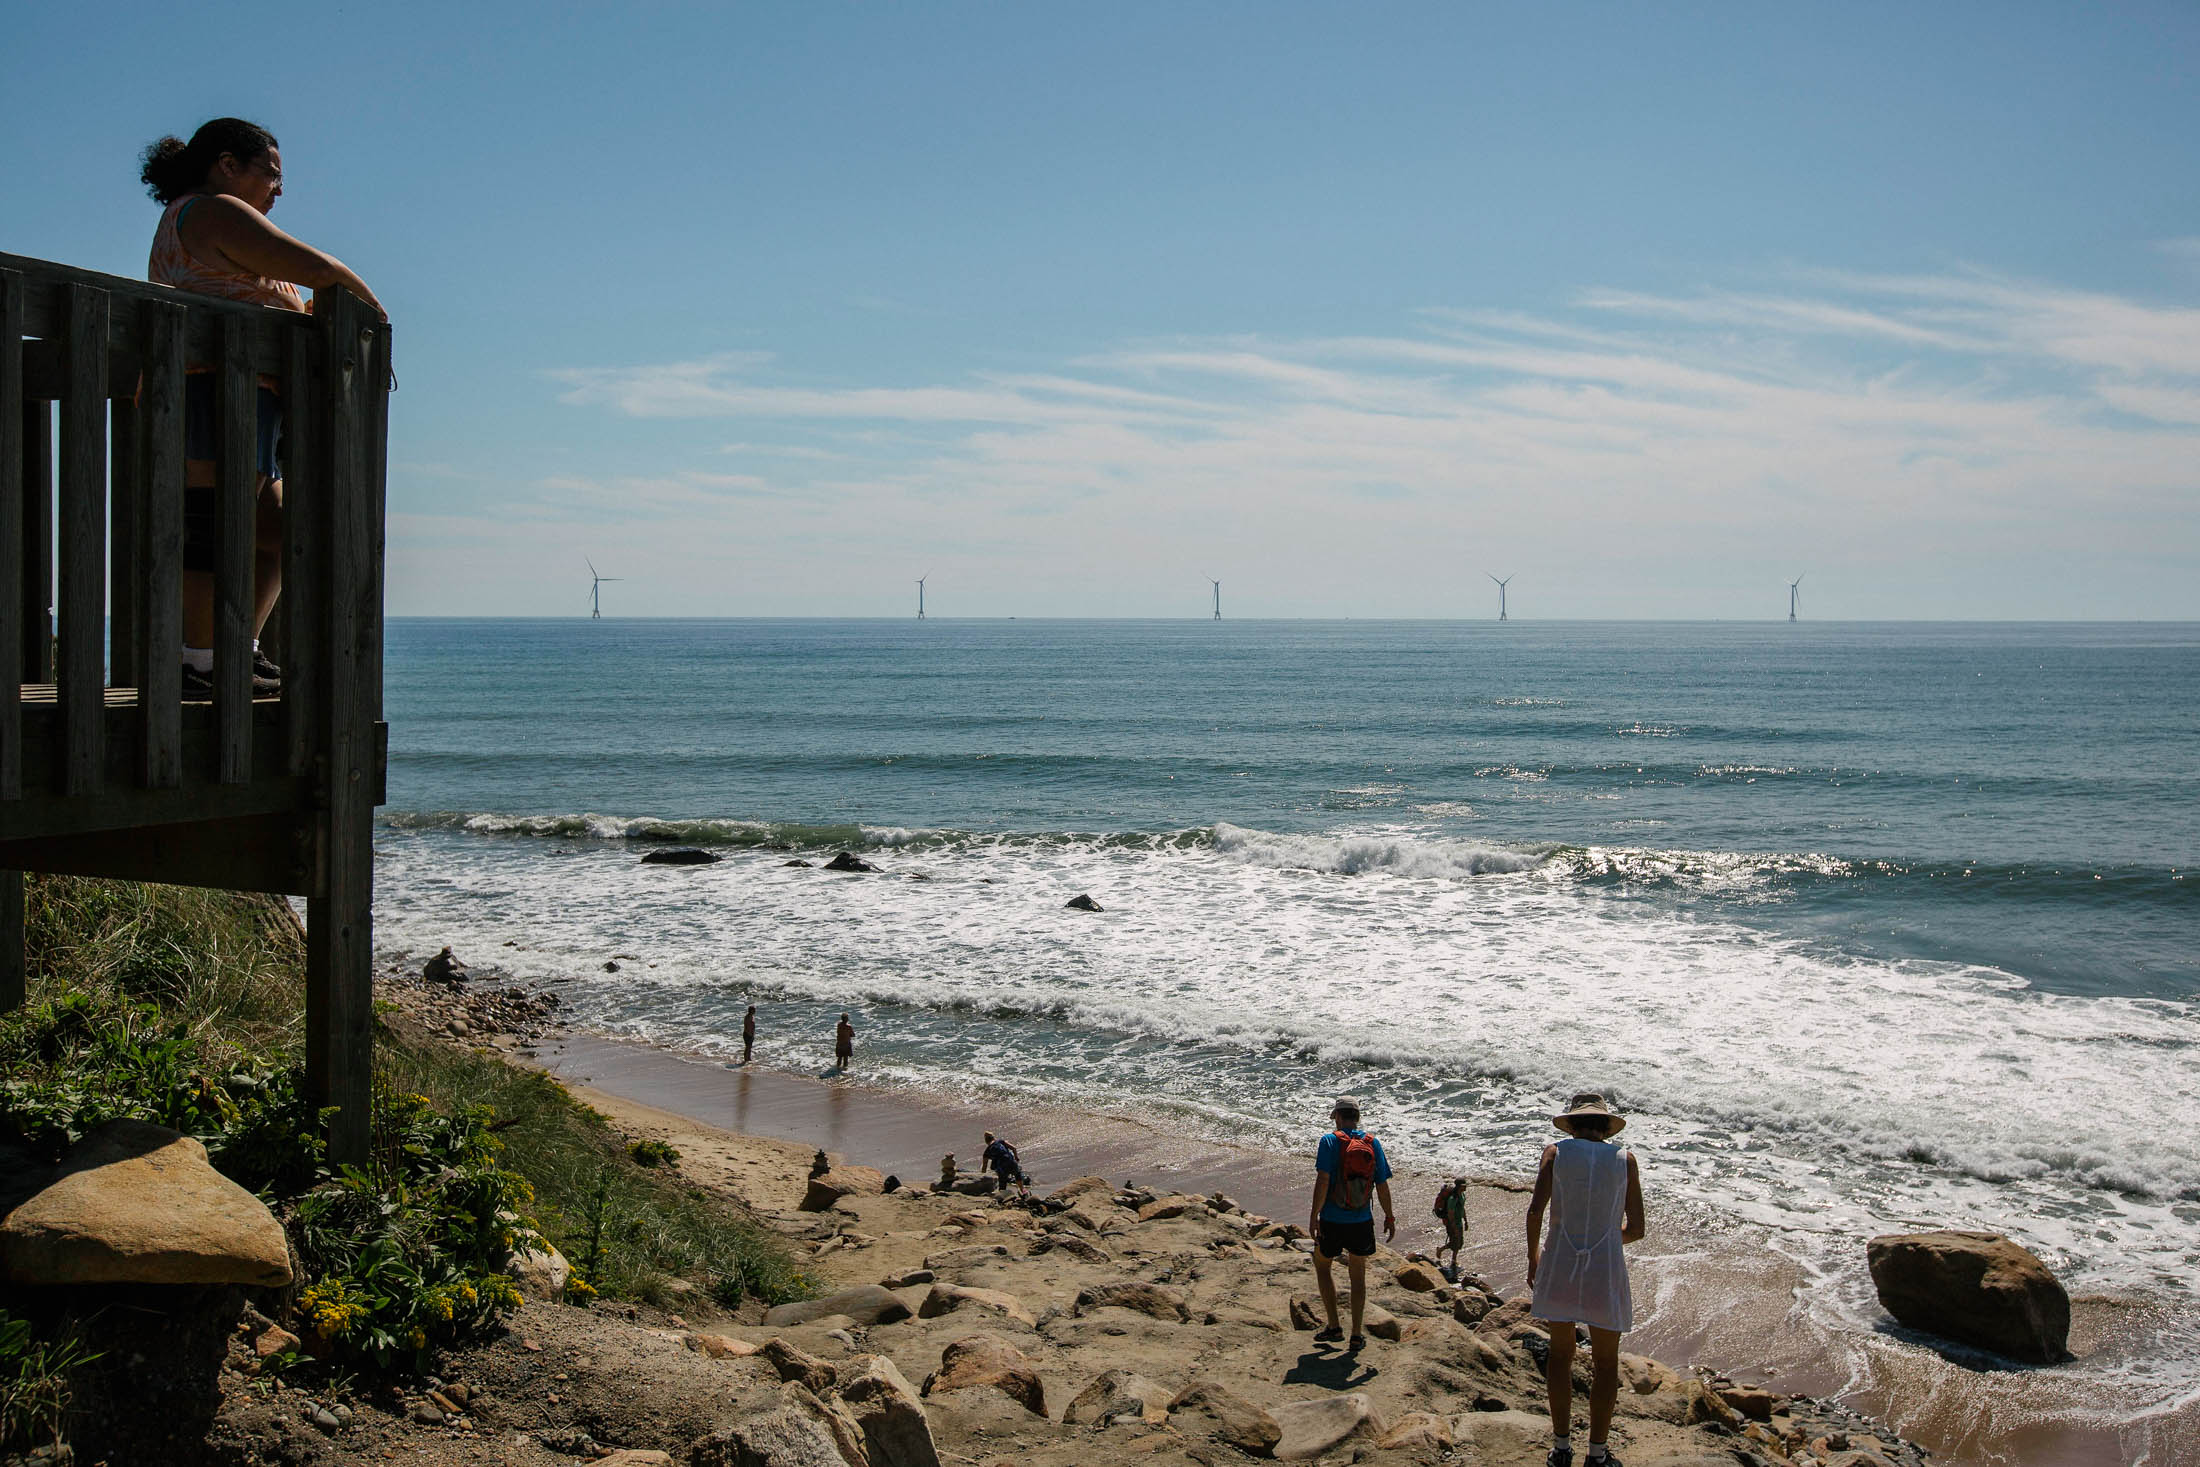 Tourists look out from a beach at the GE-Alstom Block Island Wind Farm, three&nbsp;miles off the coast of&nbsp;Block Island in&nbsp;Rhode Island.